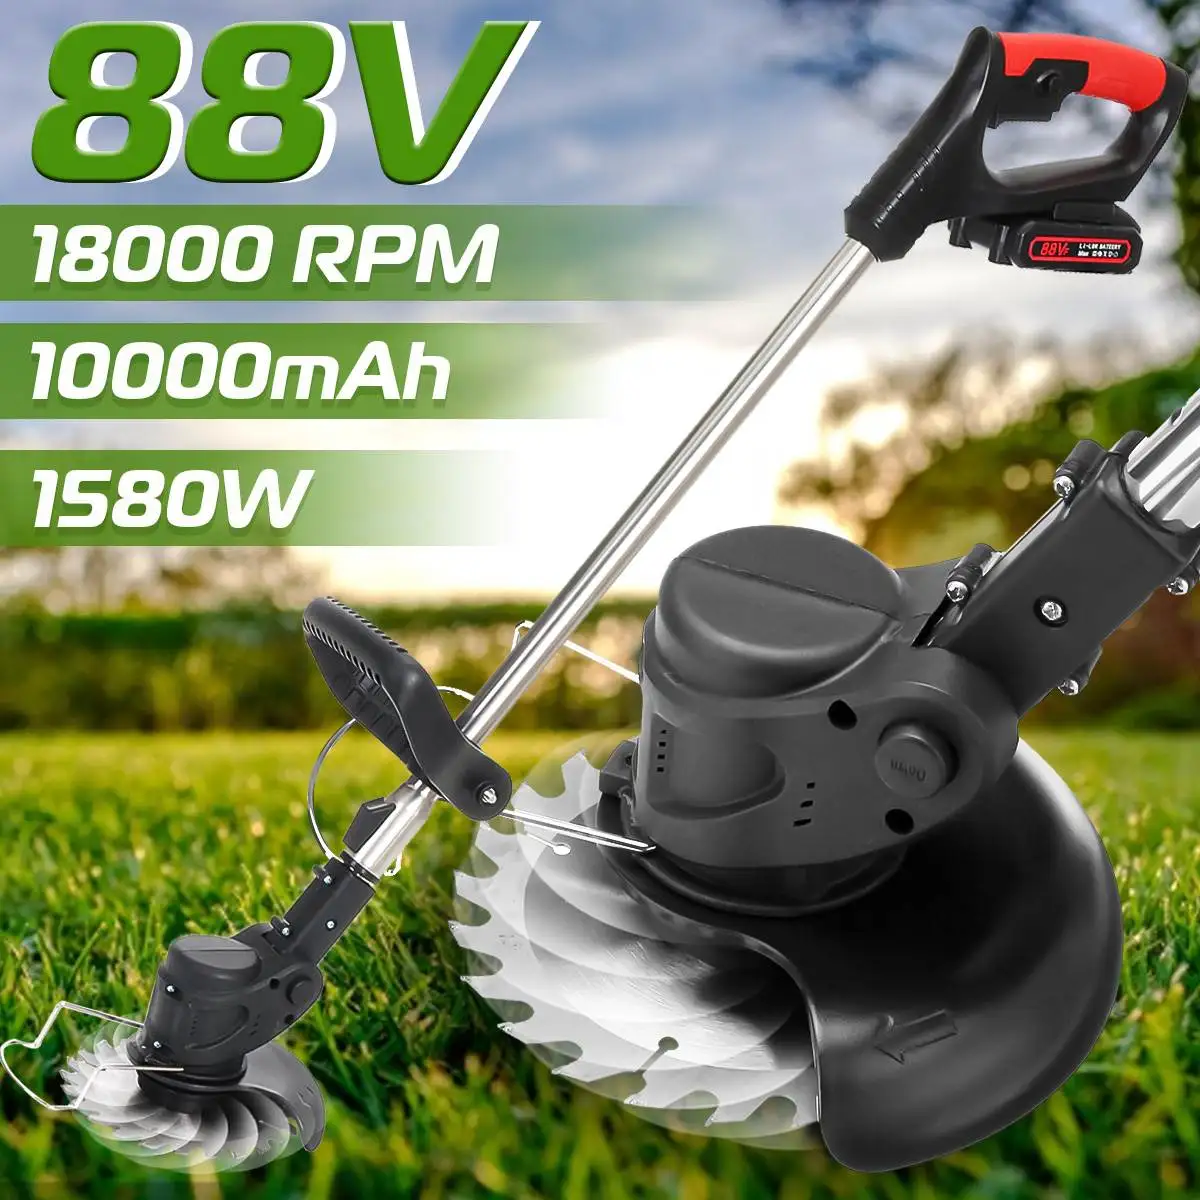 1580W Electric Grass Trimmer Powerful Trimmers Brush Cutter Lawn Mower Cordless Cutting Machine Garden Tools with 2 Li Battery